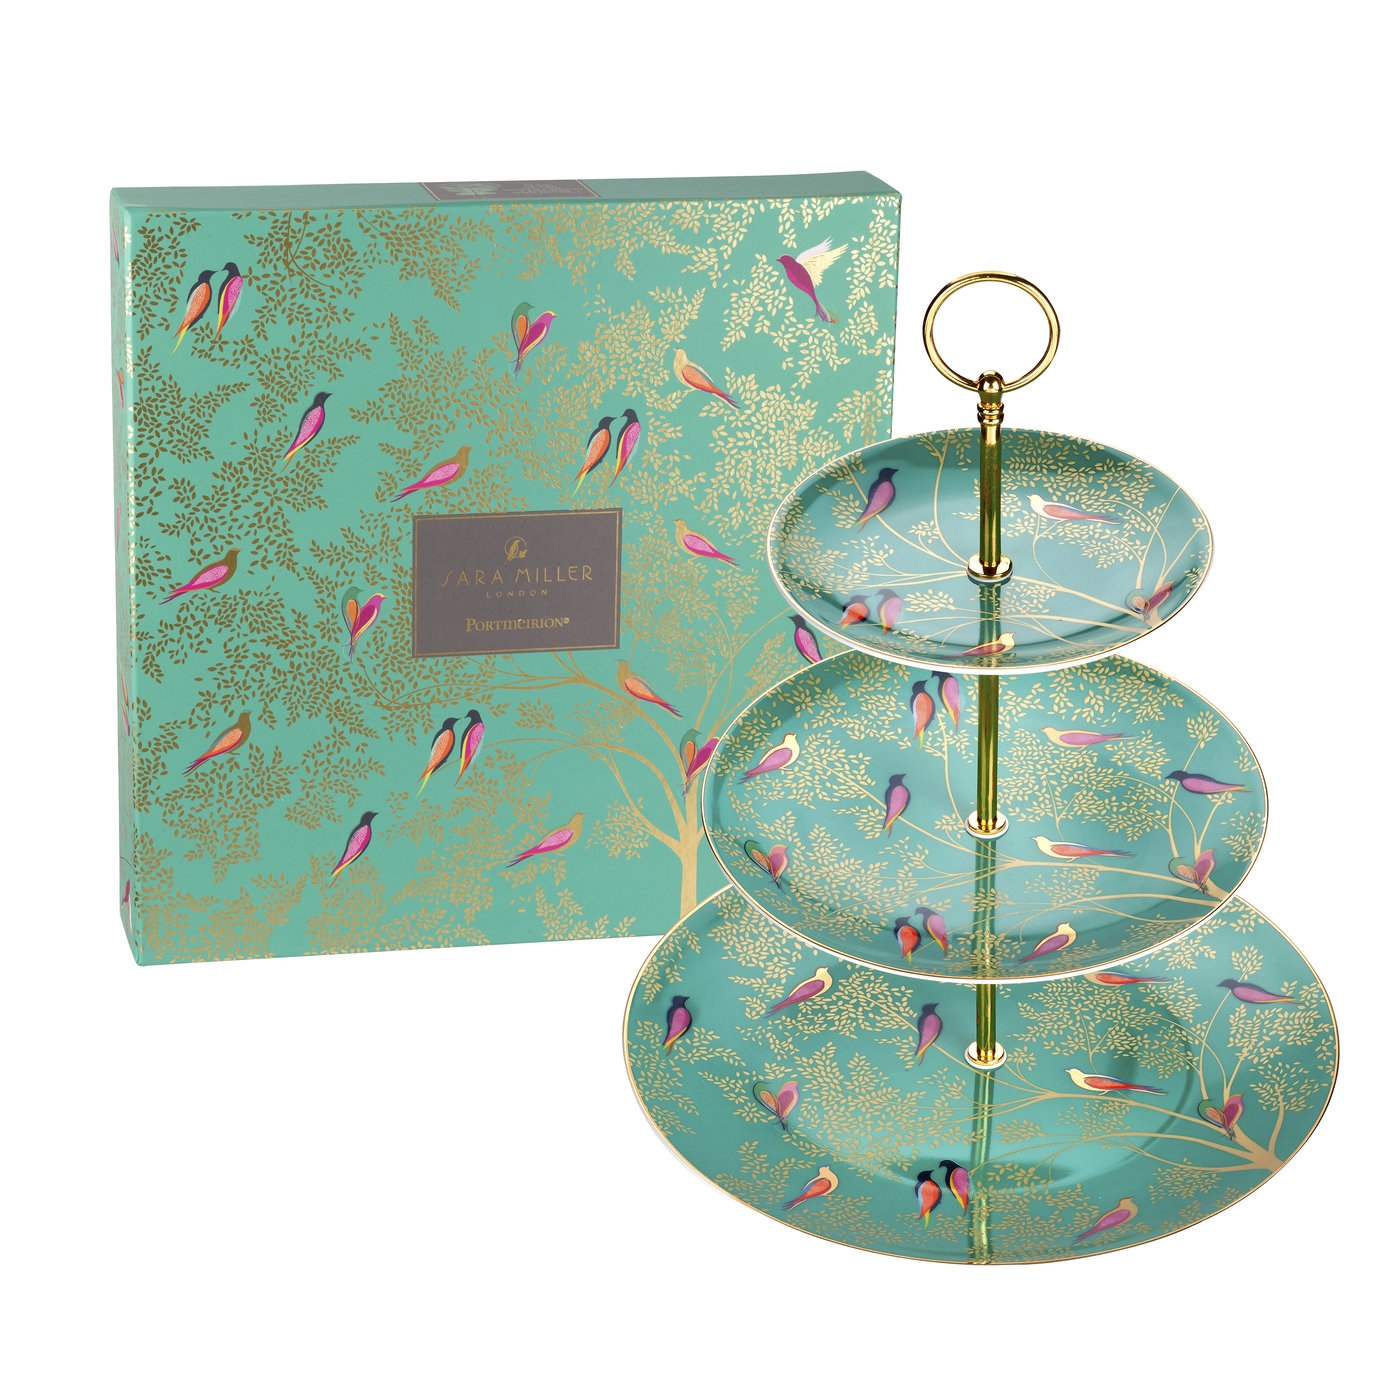 Sara Miller Chelsea Cake Stand, Green image number null